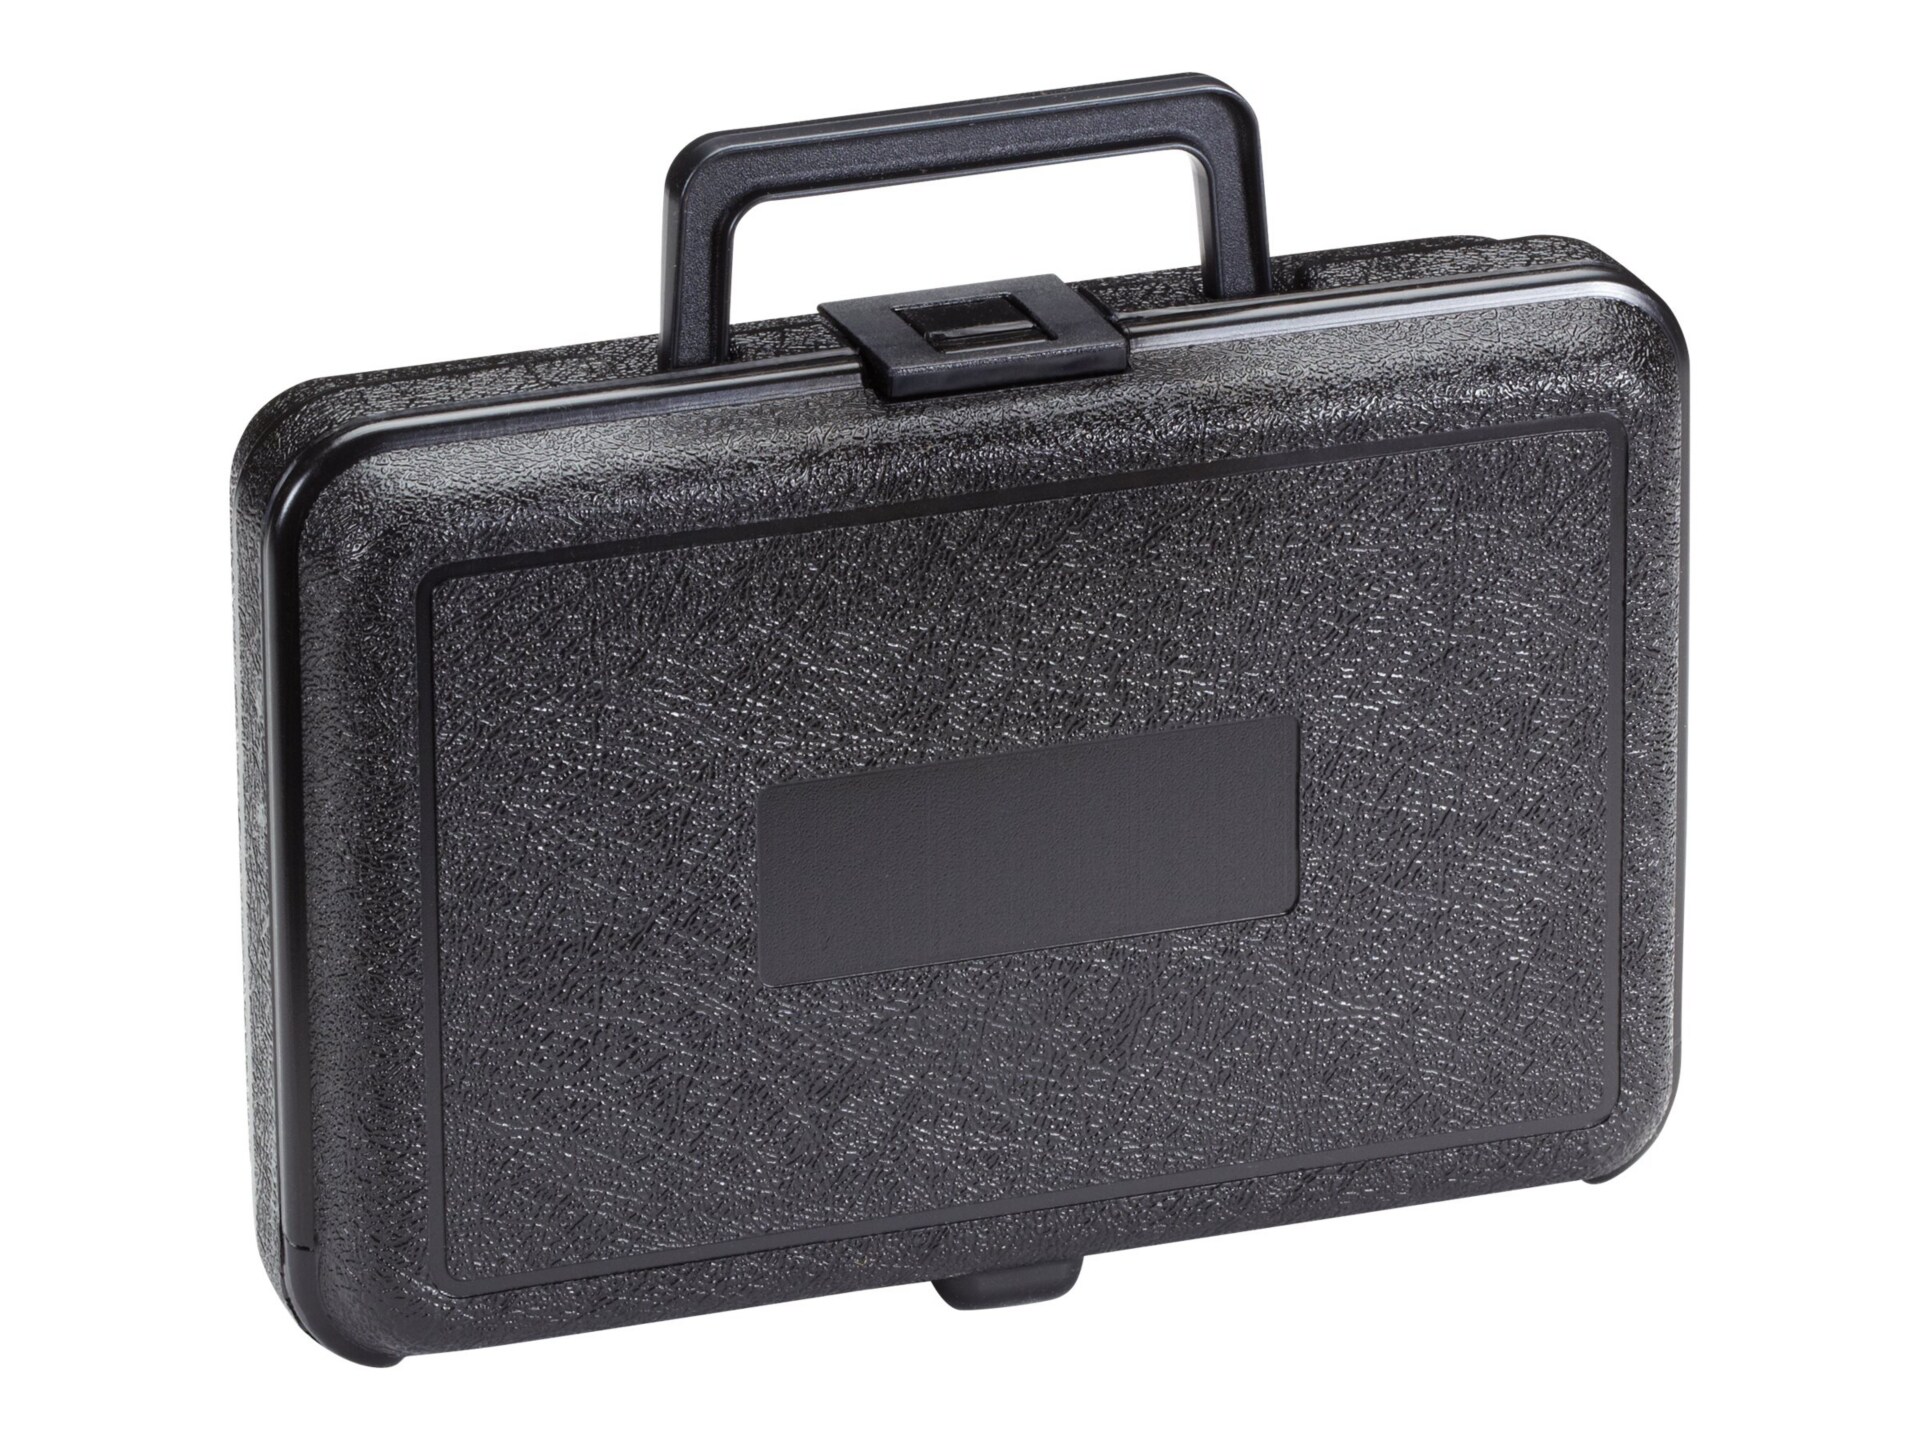 Black Box Create Your Own Cases network tool carrying case